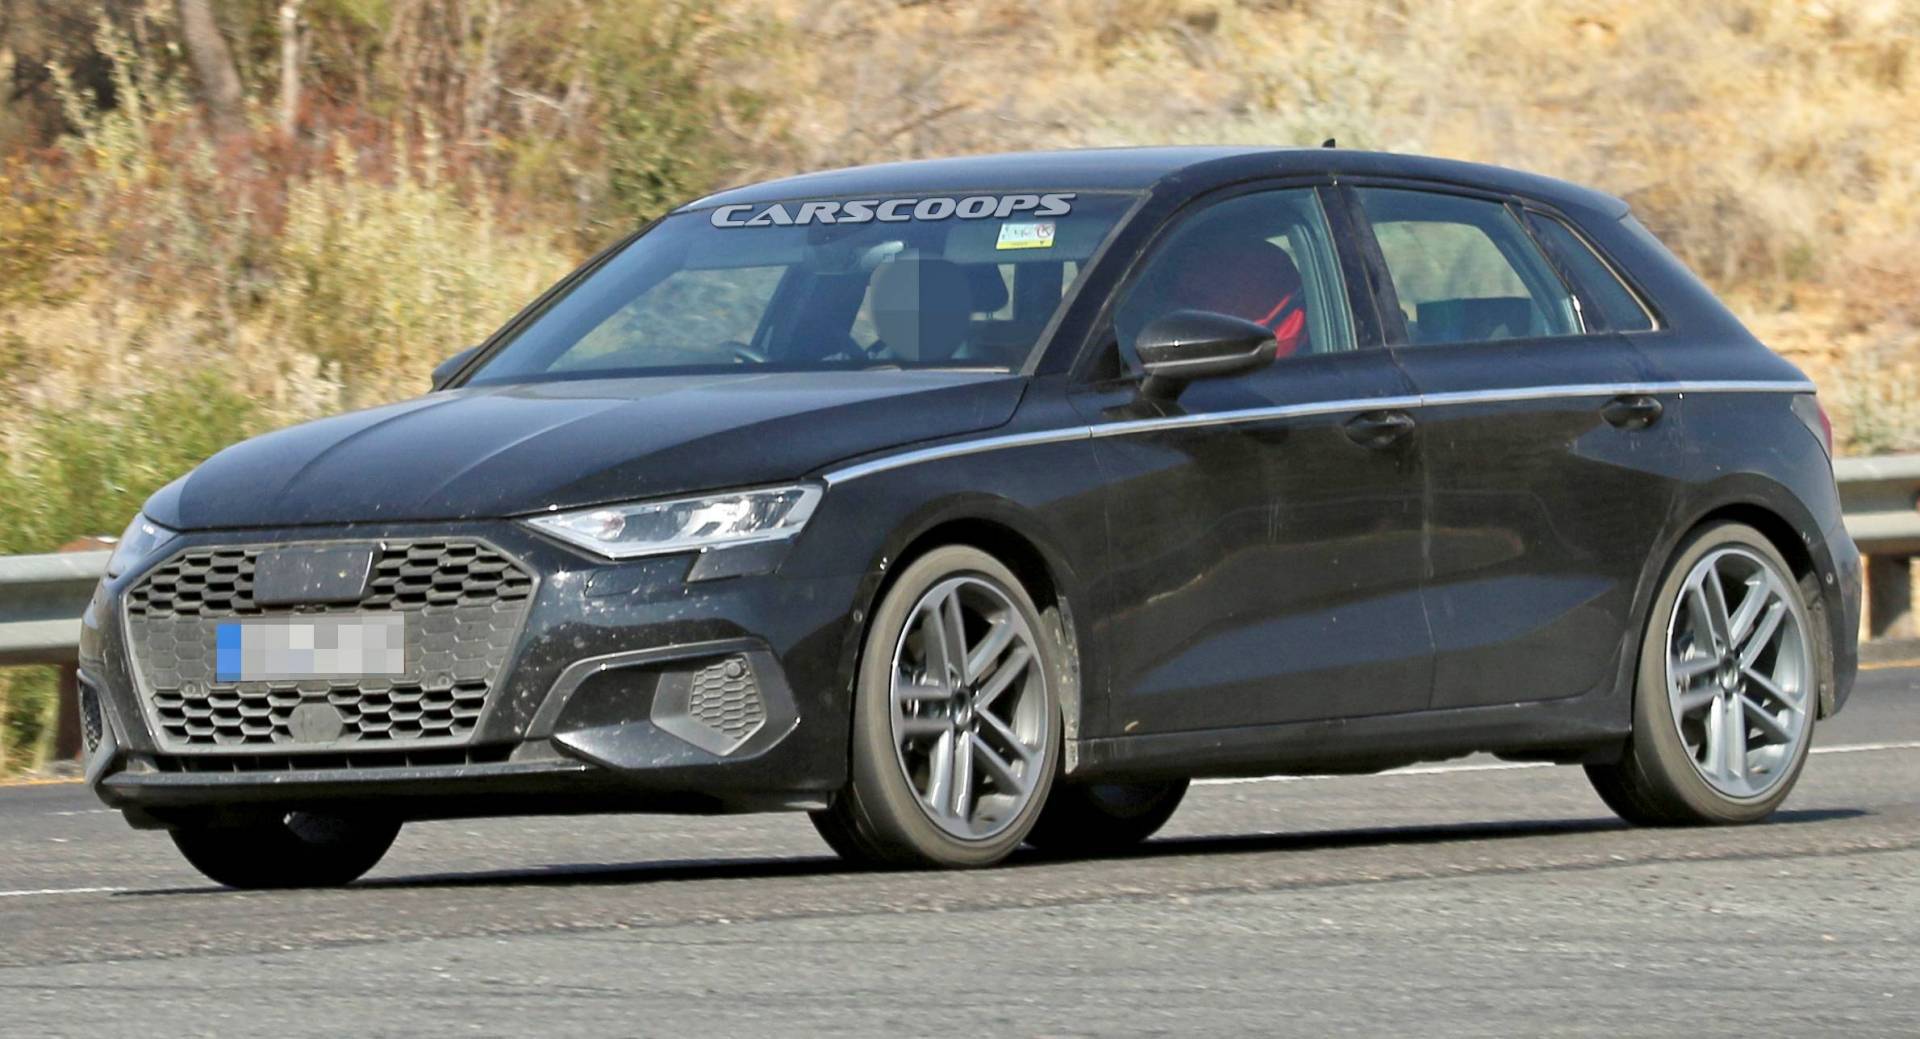 Audi A3 Sportback Facelift Spied Wearing Very Light Camouflage